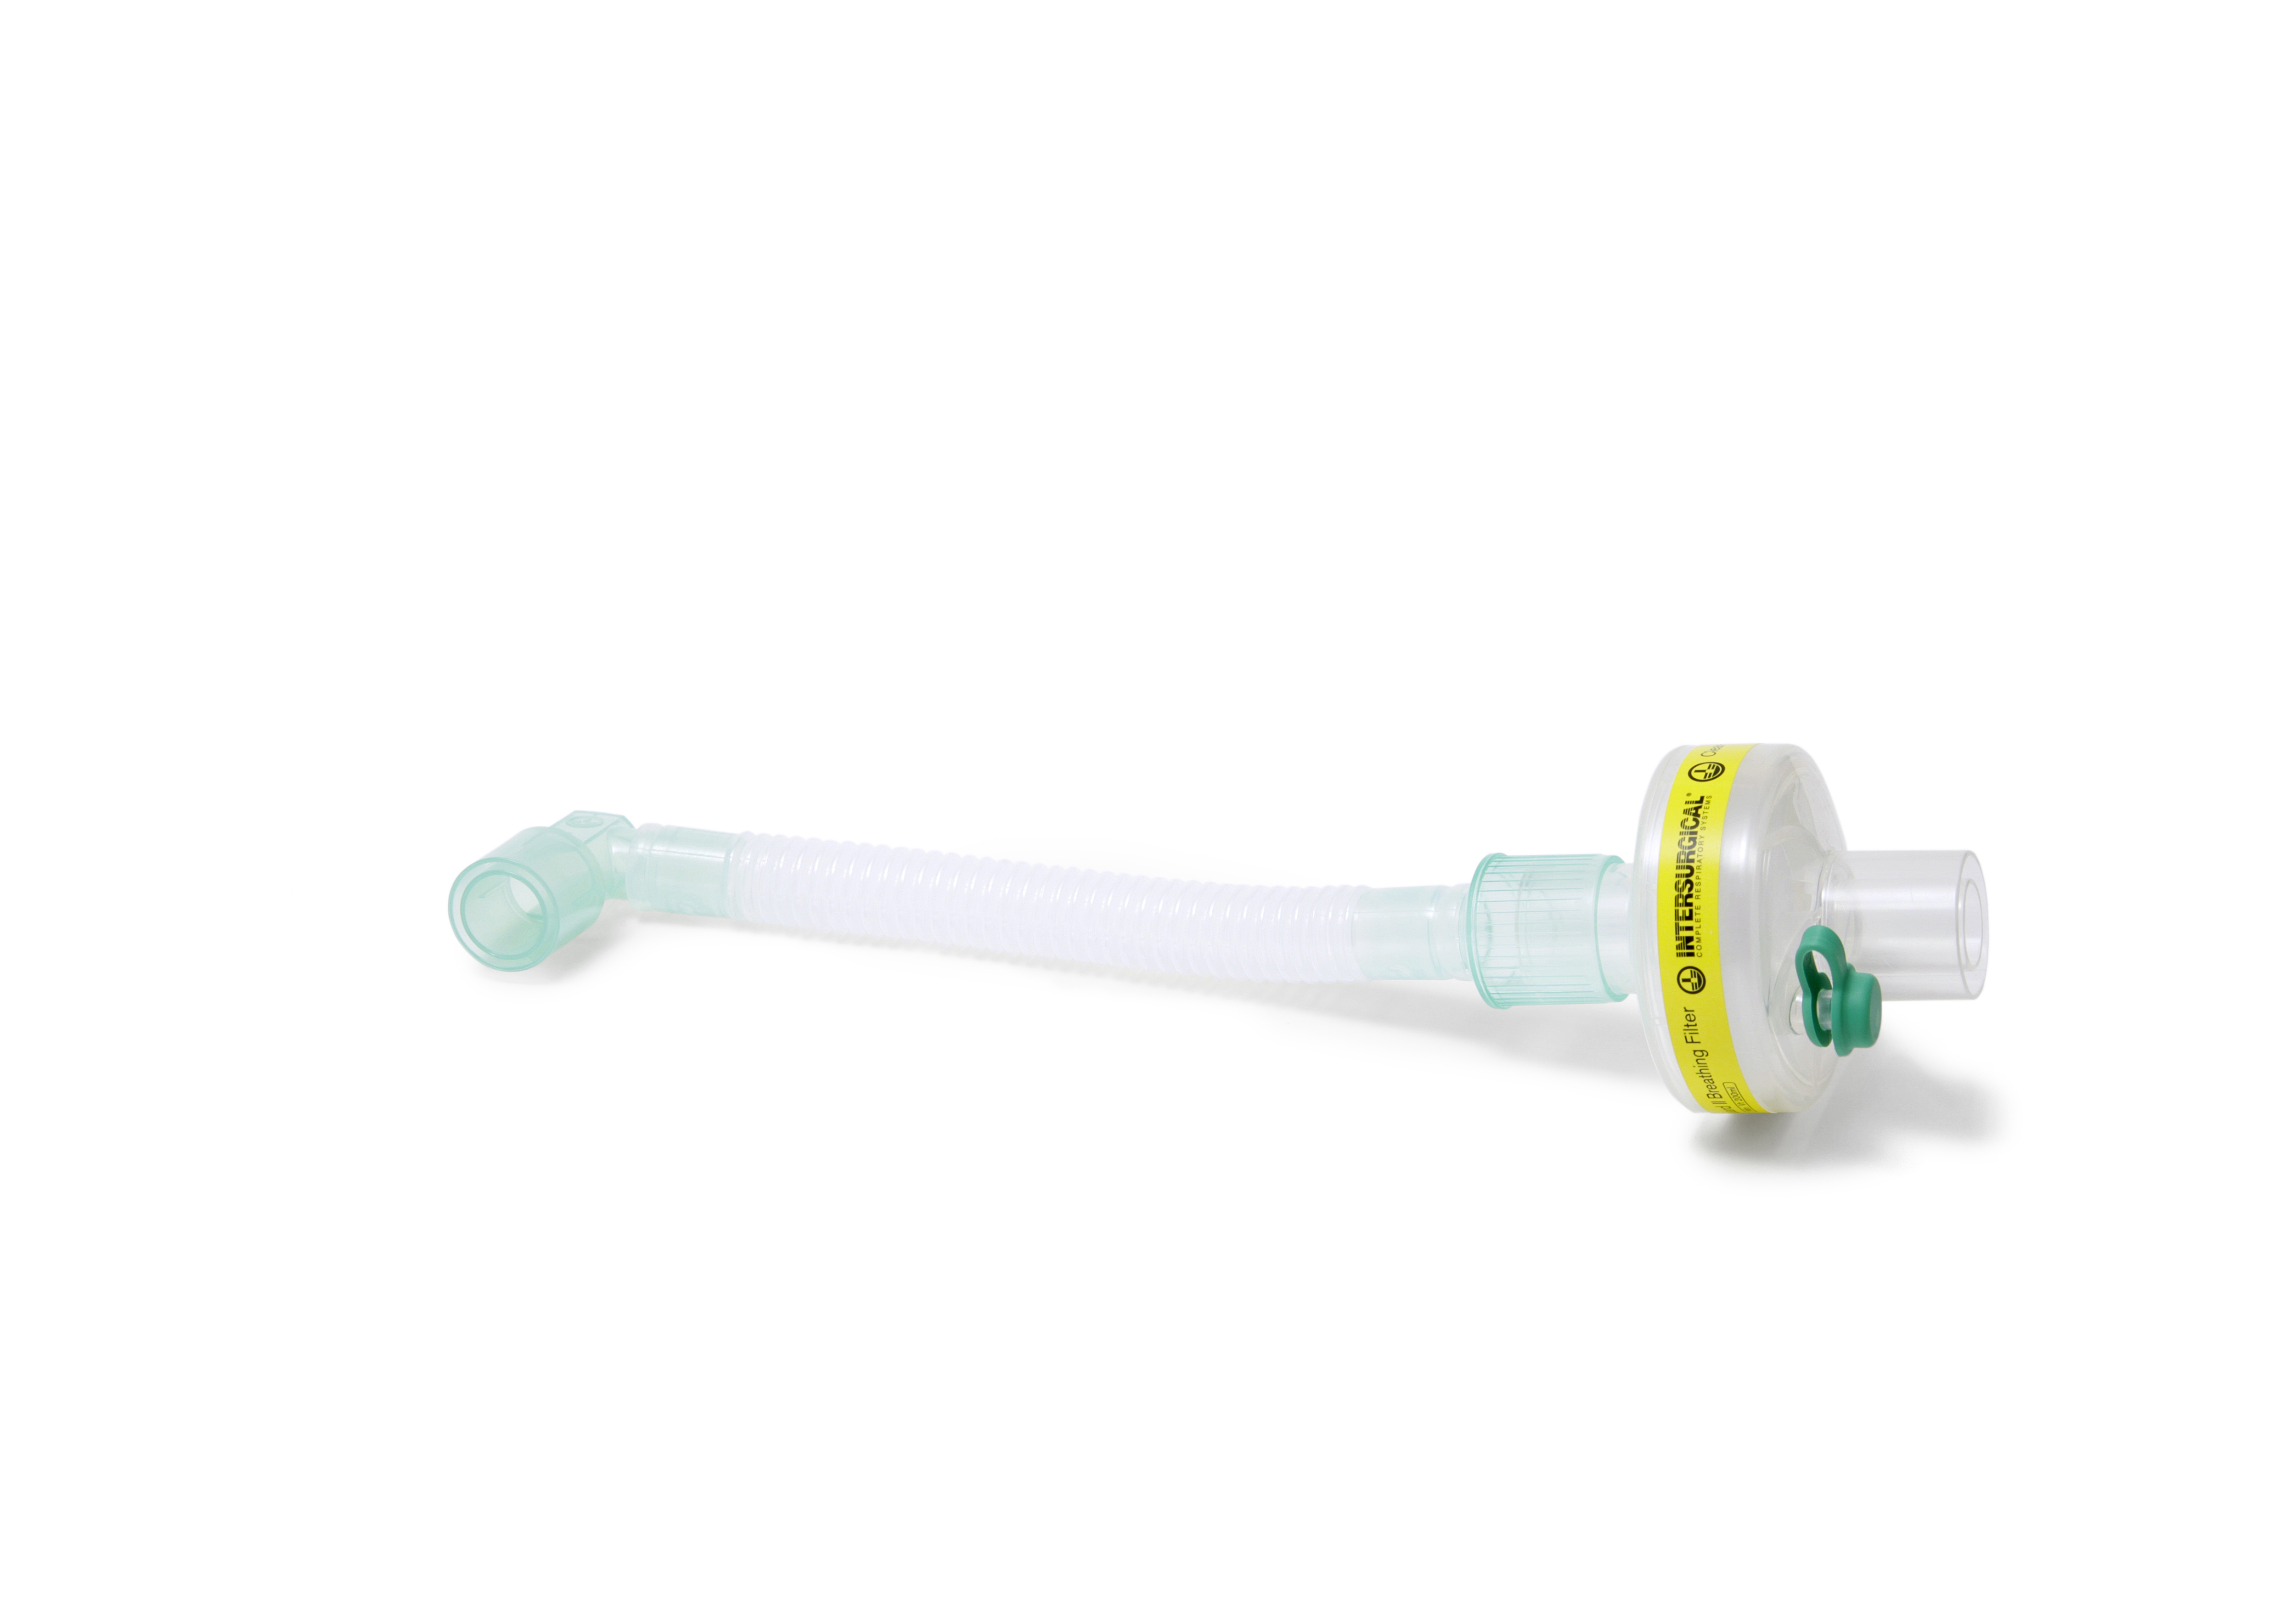 Clear-Guard™3 breathing filter with luer port, Superset catheter mount and fixed elbow